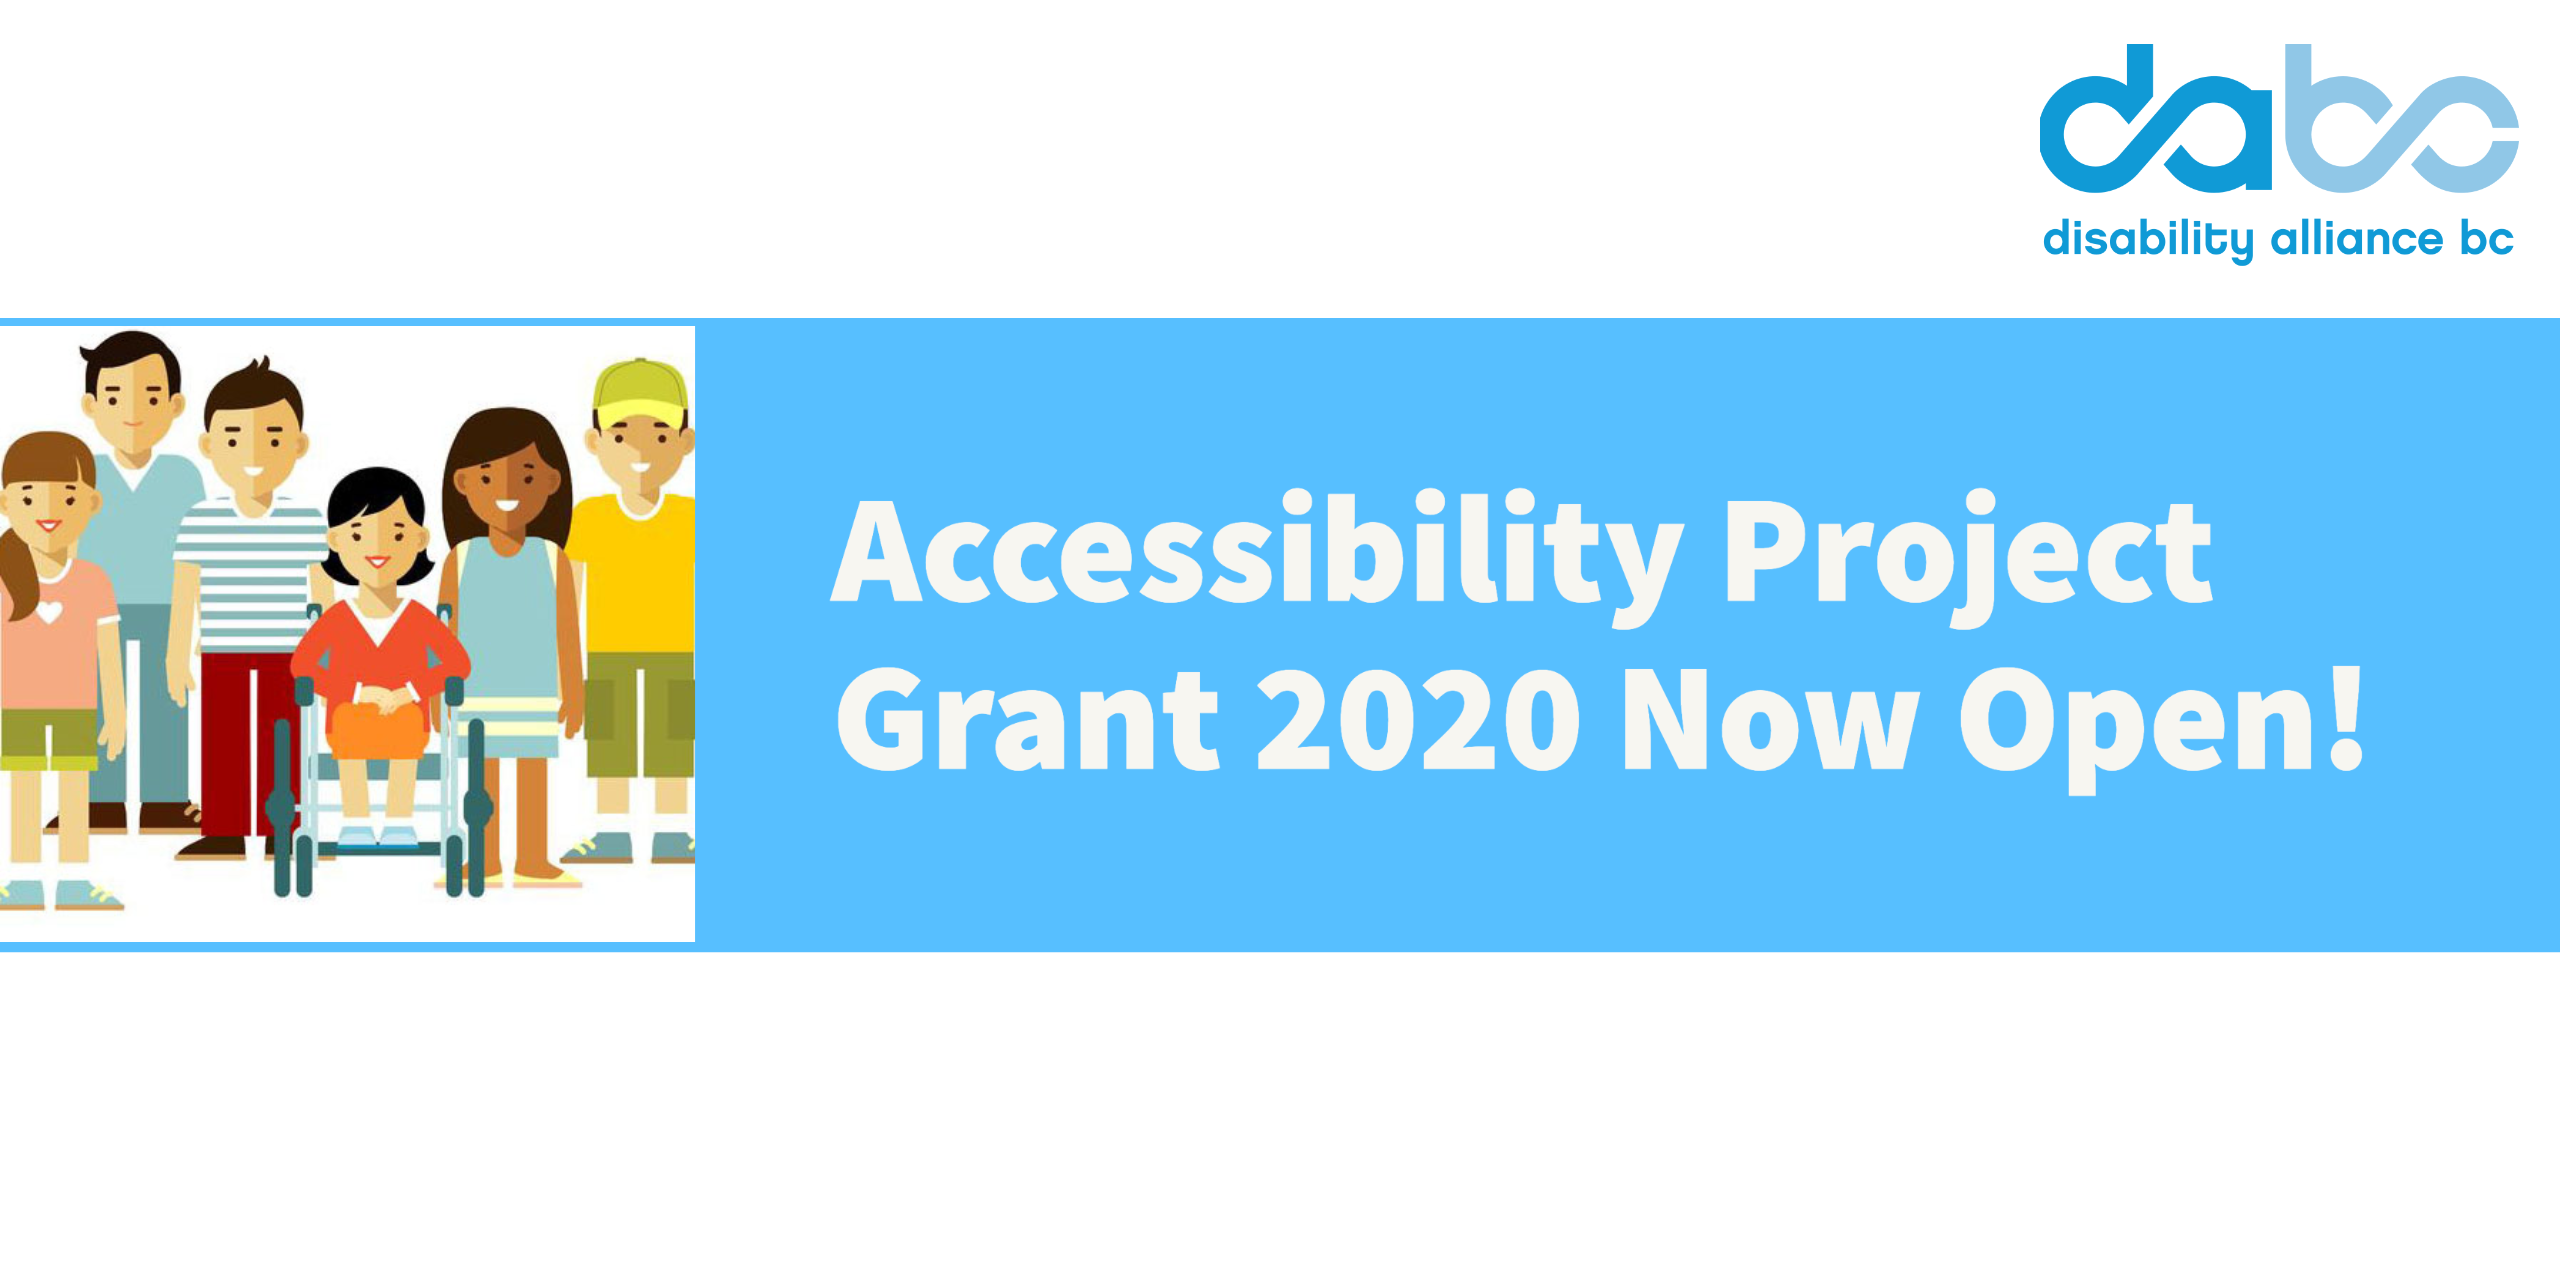 Accessibility Project 2020 banner. Image reads: "Accessibility Project Grant 2020 Now Open!"